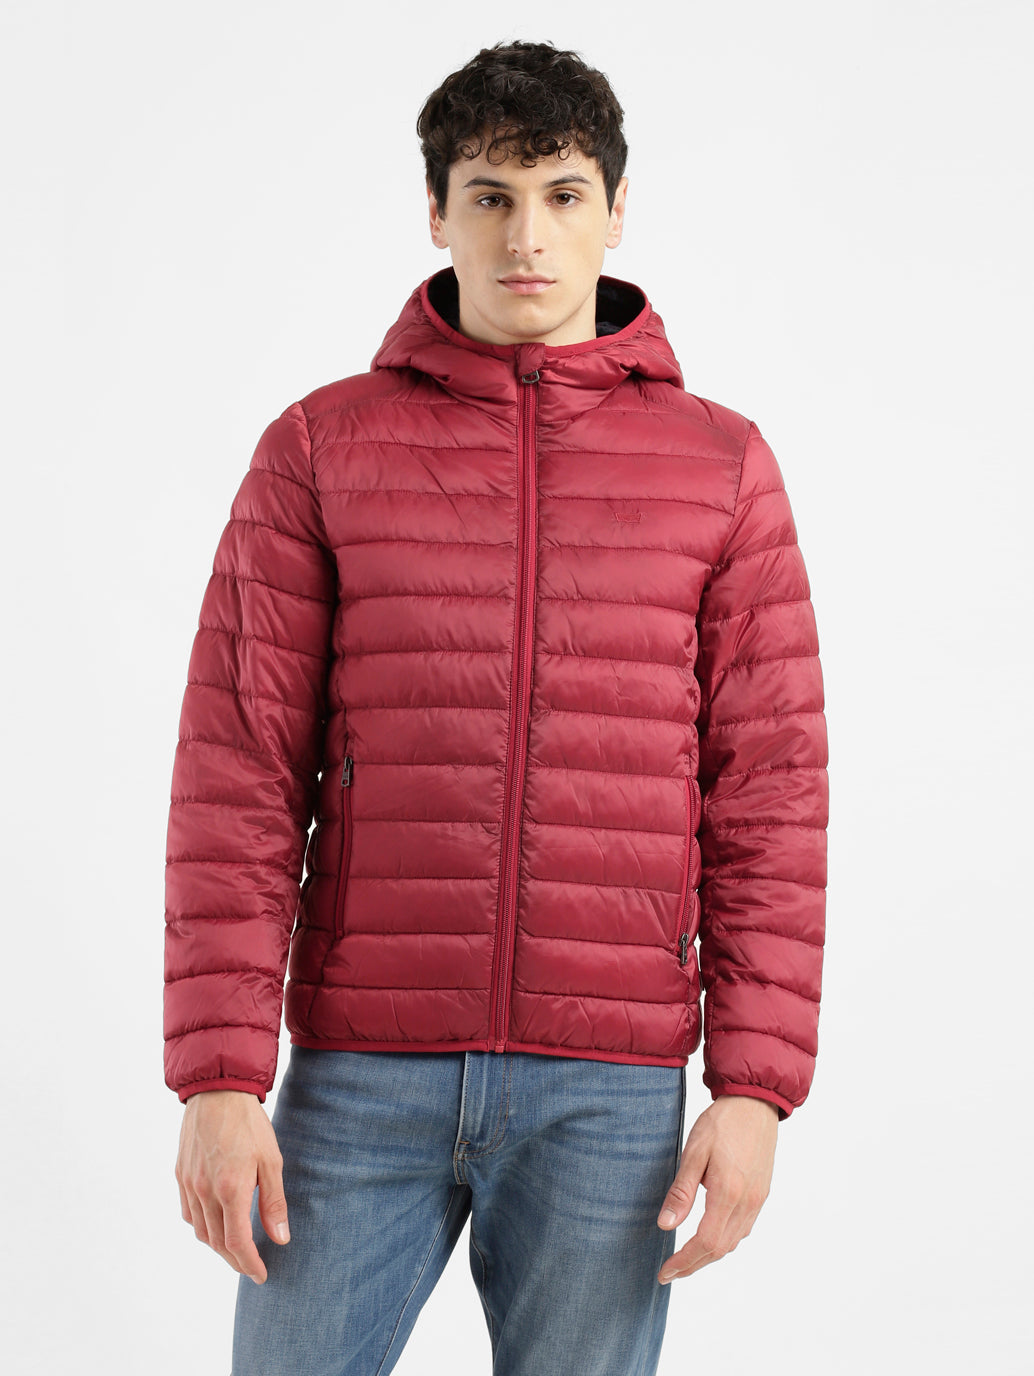 Men's Solid Red Hooded Jacket